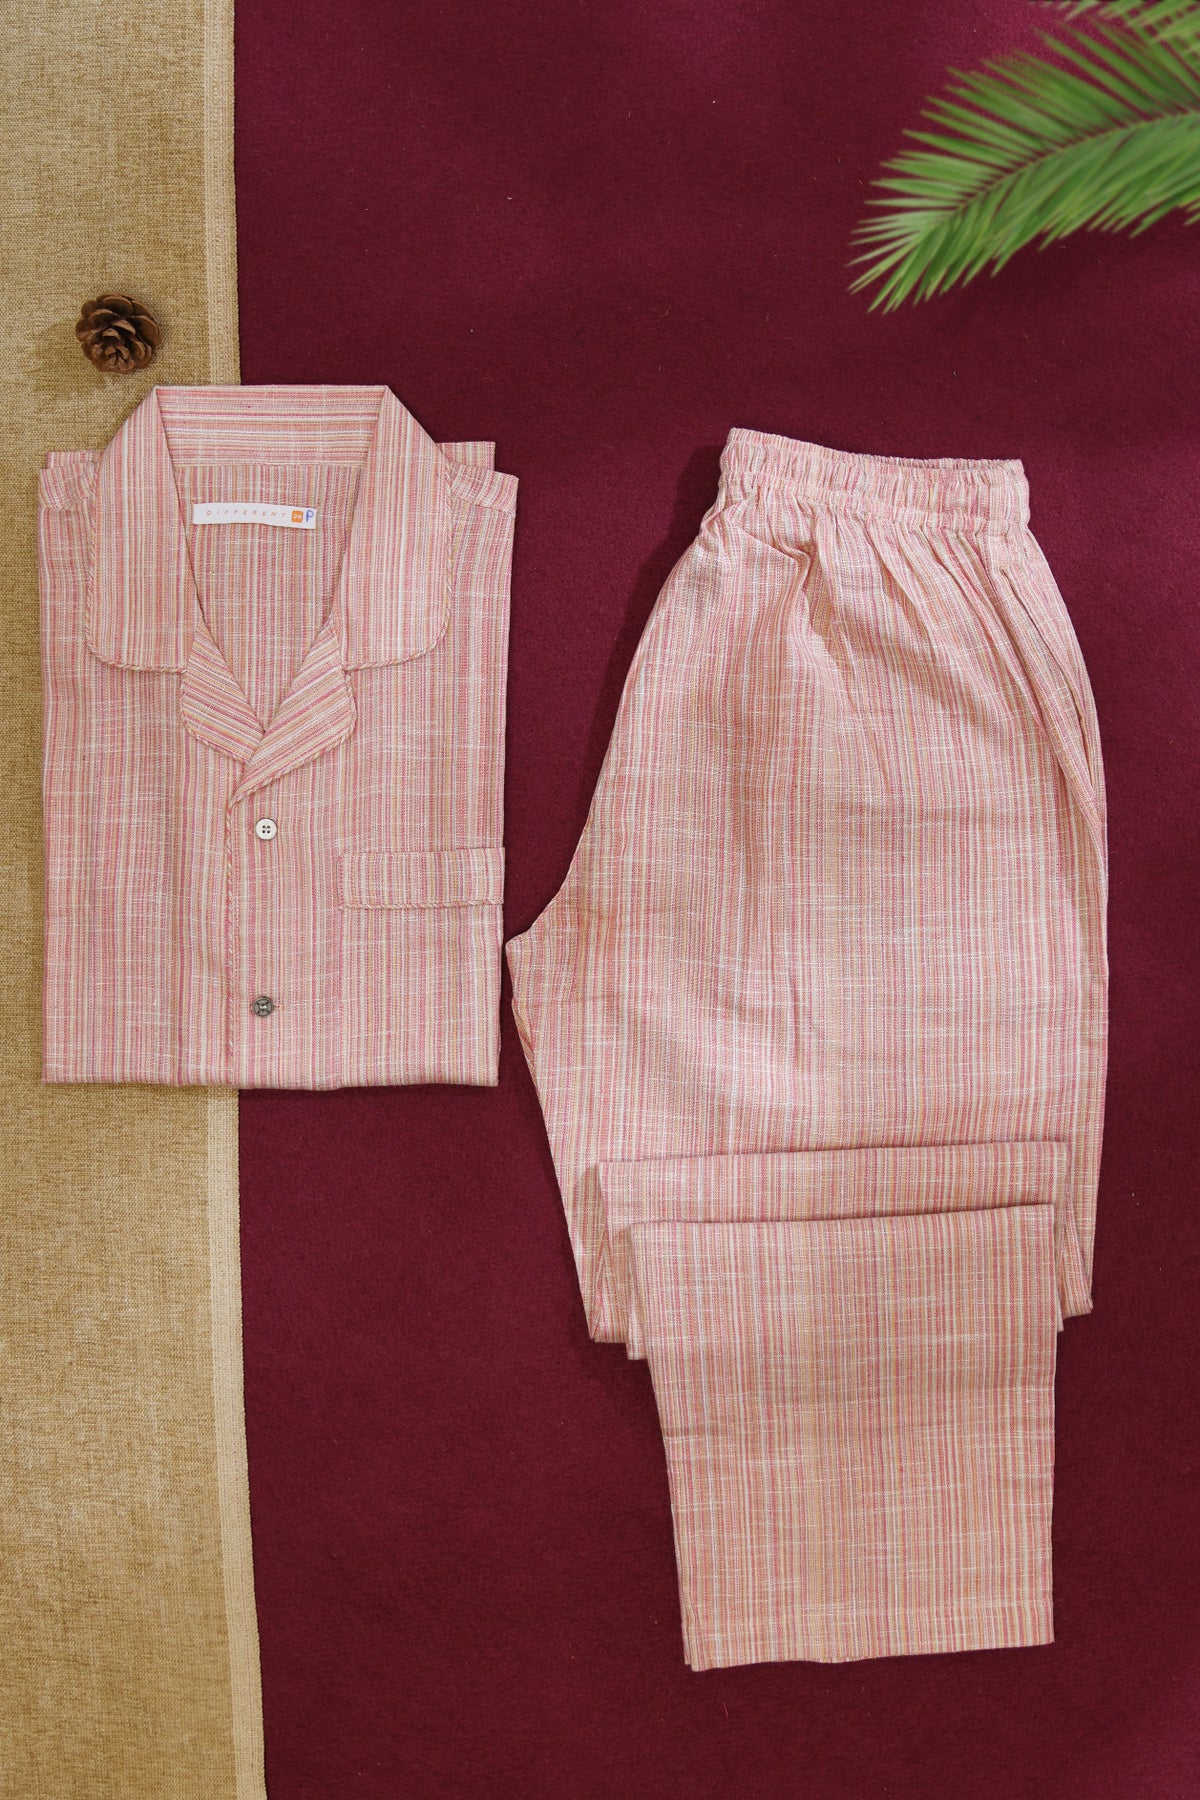 Camp Collar Shirt And Pant Set In Stripes Peach Pink Cotton Mens Night Suit